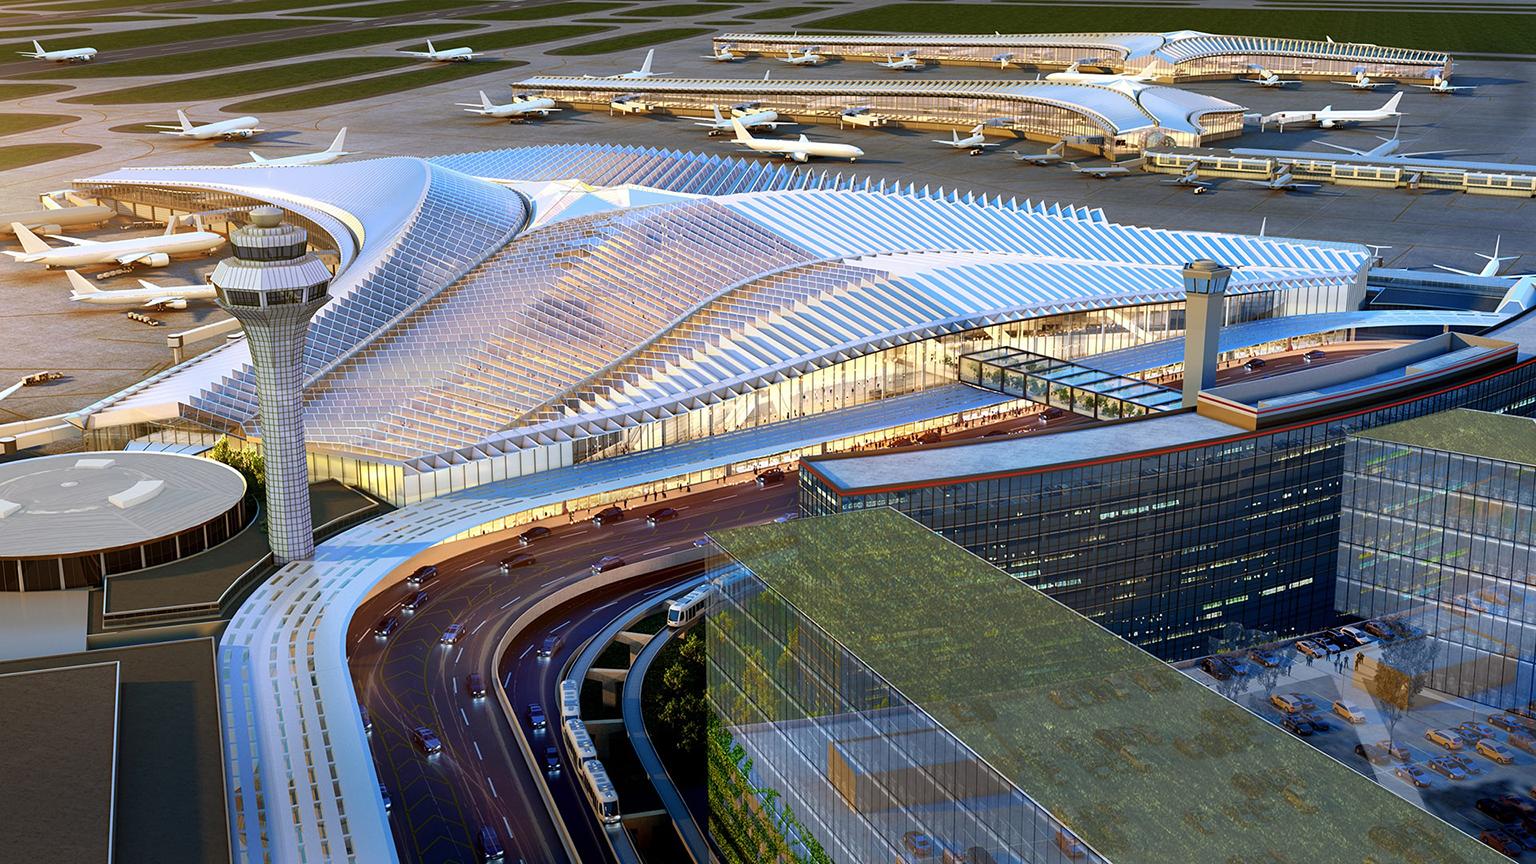 The O’Hare expansion proposal from Studio ORD (Chicago Department of Aviation)